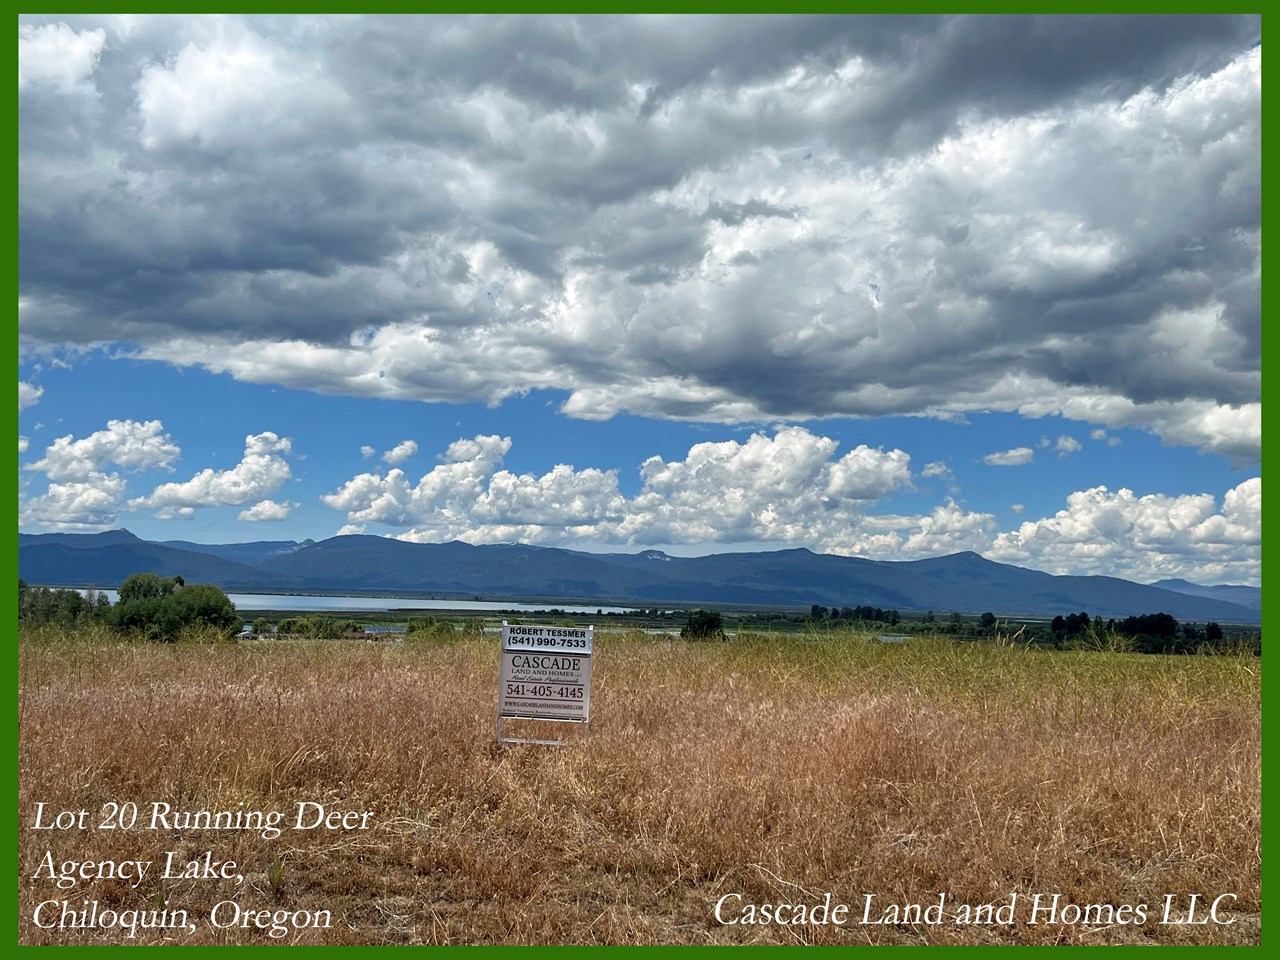 view of from the parcel toward agency lake and the snow-capped cascade mountains!